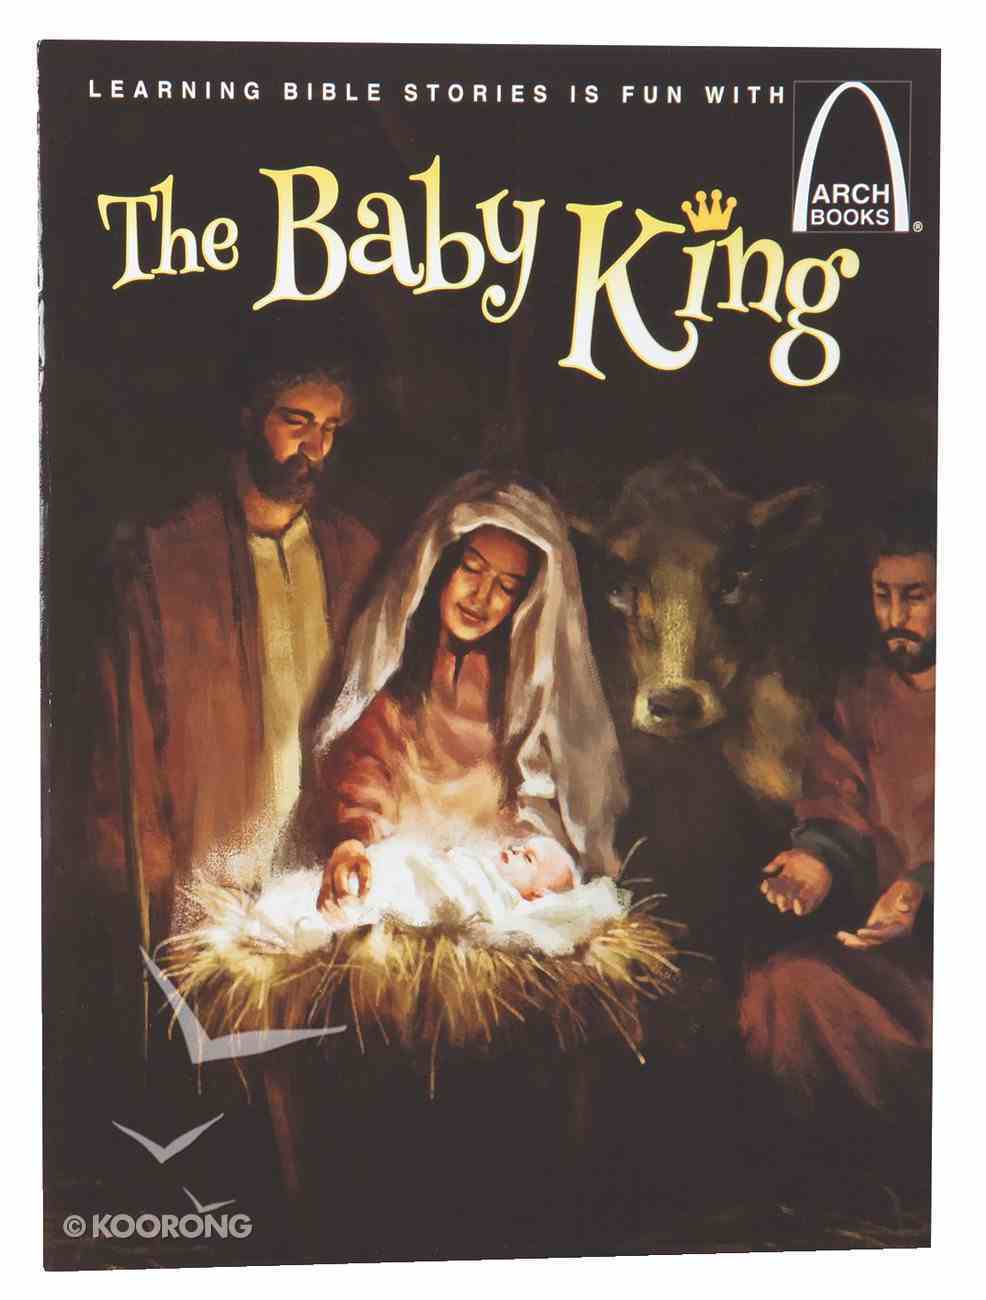 The Baby King (Arch Books Series) Paperback